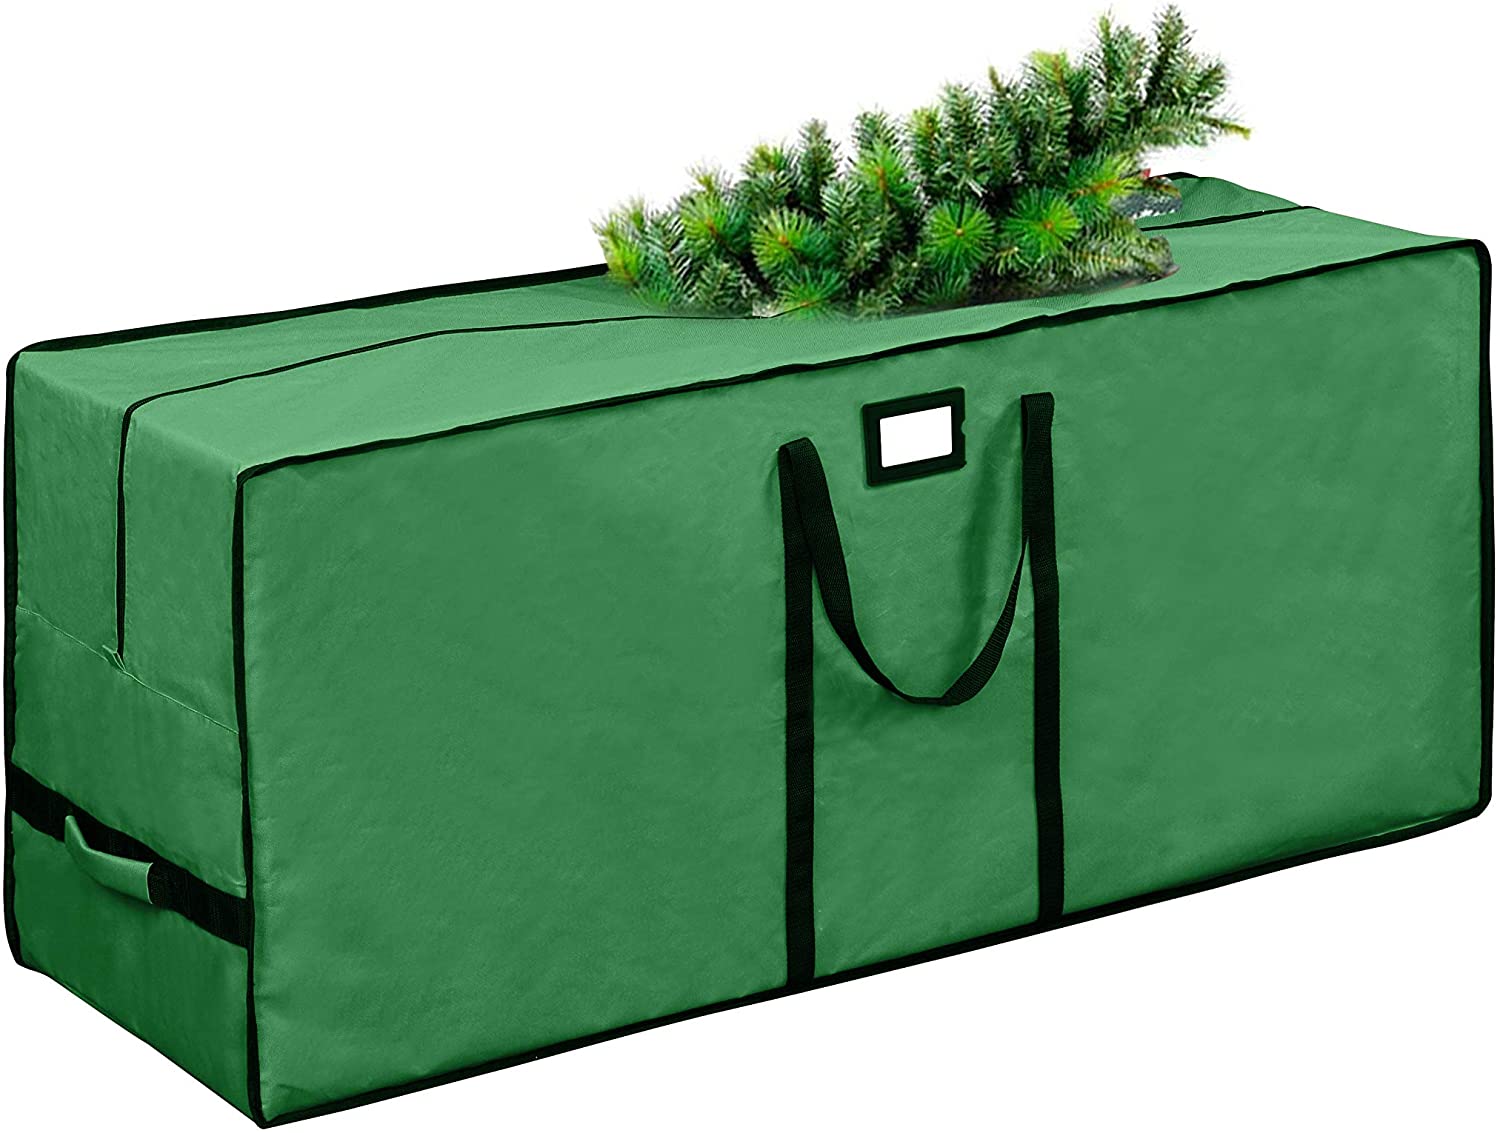 Upright Christmas Tree Storage bag for Sale in Anaheim, CA - OfferUp